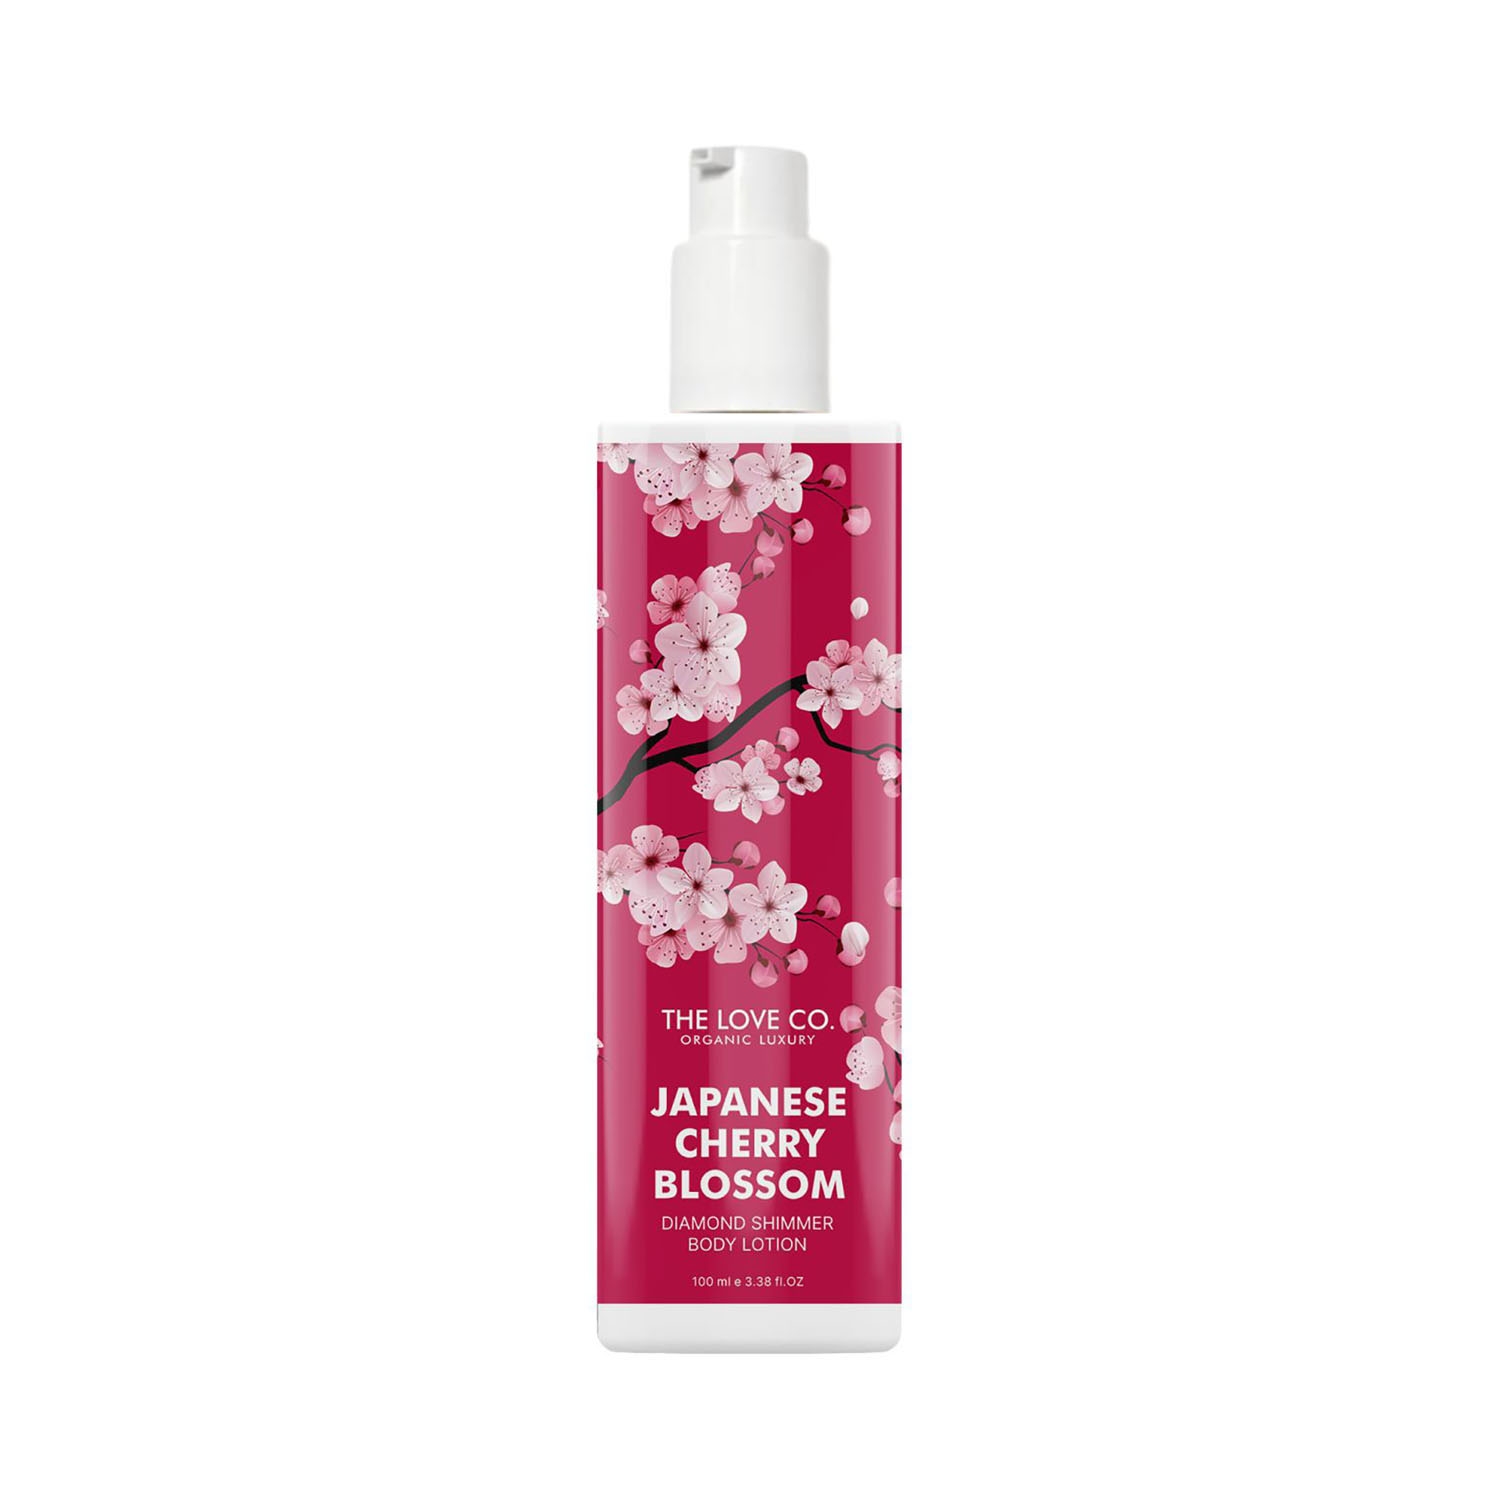 THE LOVE CO. | THE LOVE CO. Japanese Cherry Blossom Diamond Shimmer Body Lotion (100ml)